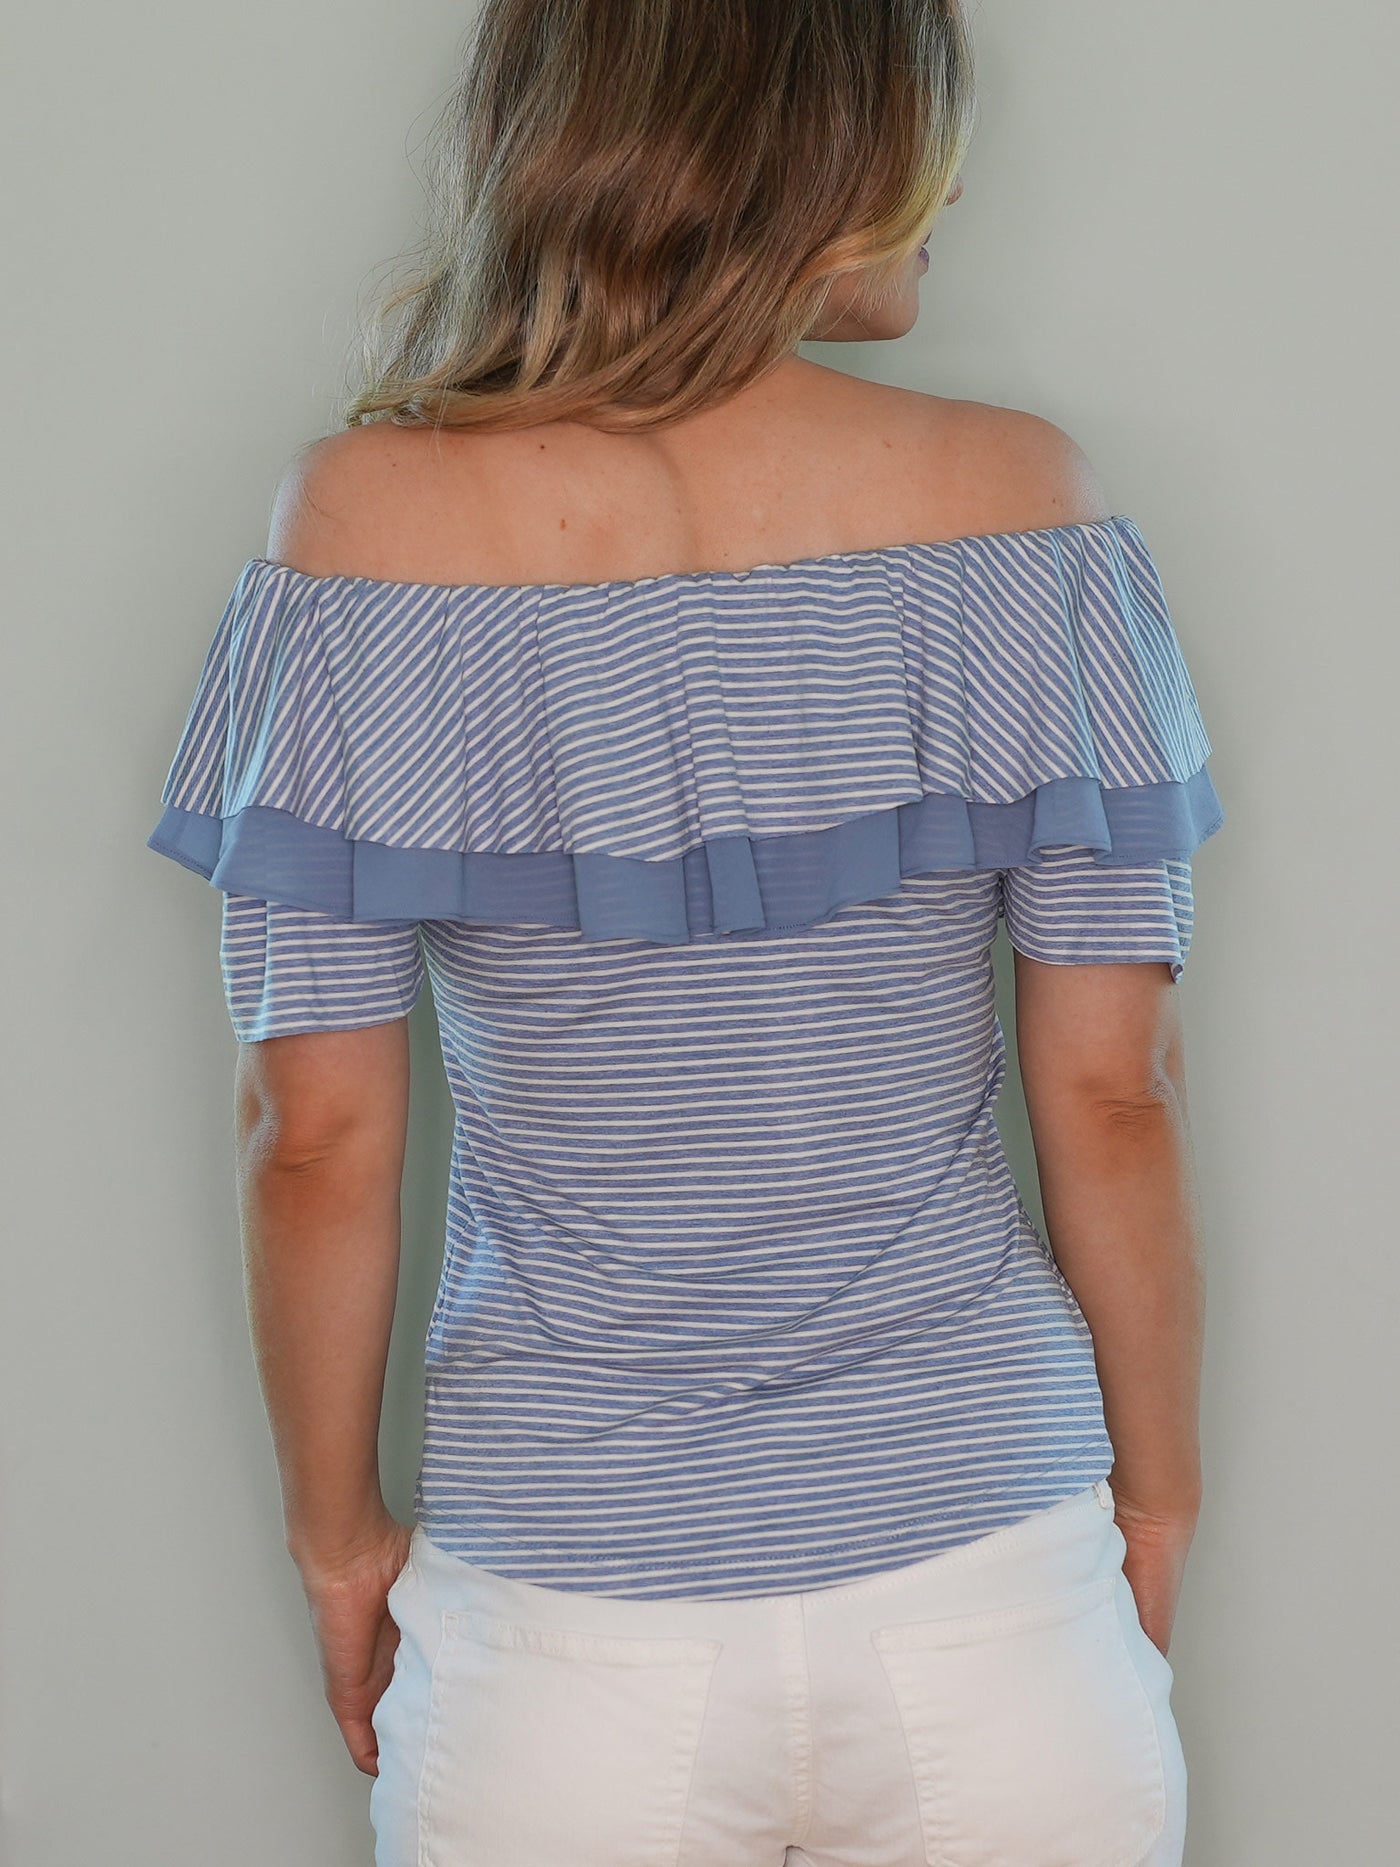 Blue and white striped off the shoulder top back